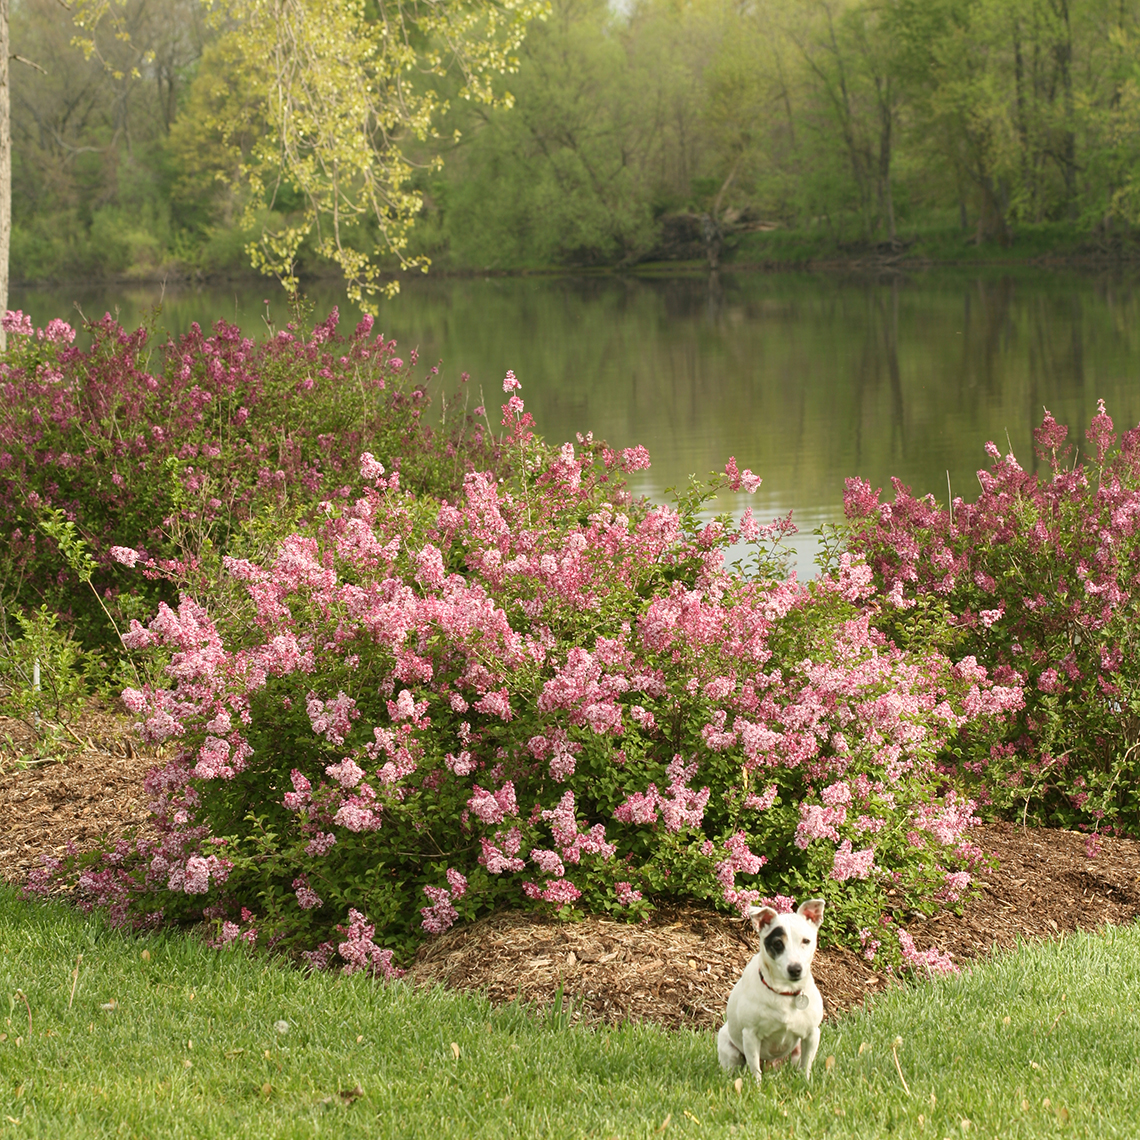 Scent and Sensibility dwarf lilac in the landscape with the Grand River in the background